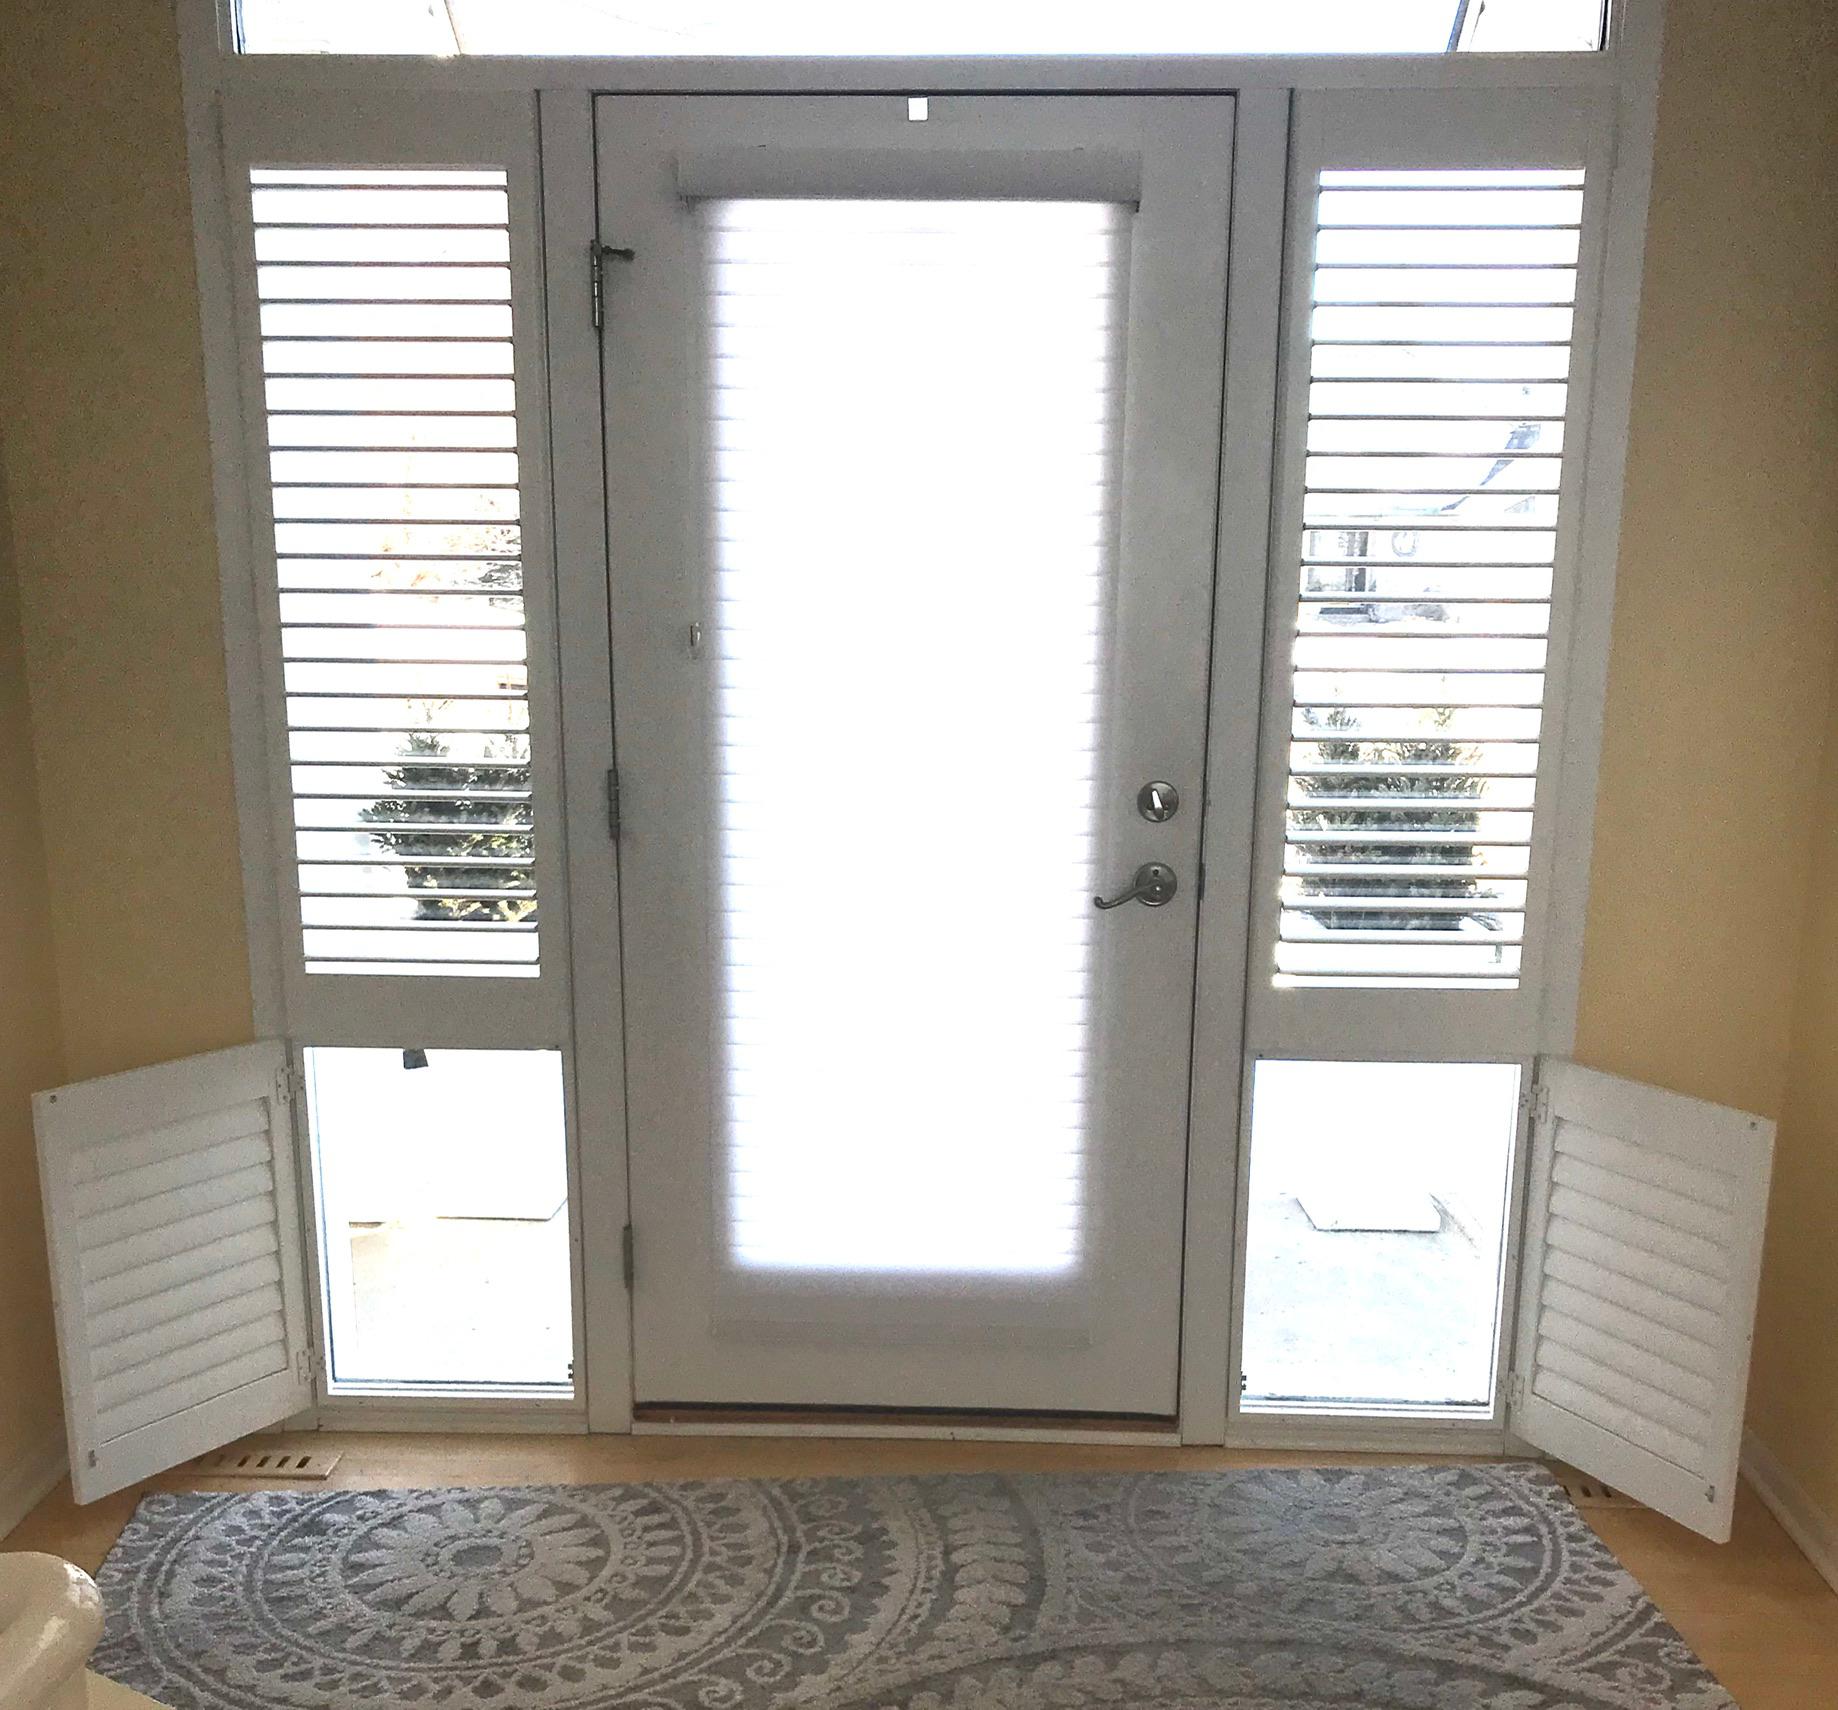 These Victoria clients wanted privacy at their front door sidelight windows, but they had dogs that liked to look out from that vantage point. Custom shutters to the rescue! Close the louvers above for privacy, and swing open the doors below for your furry friends!